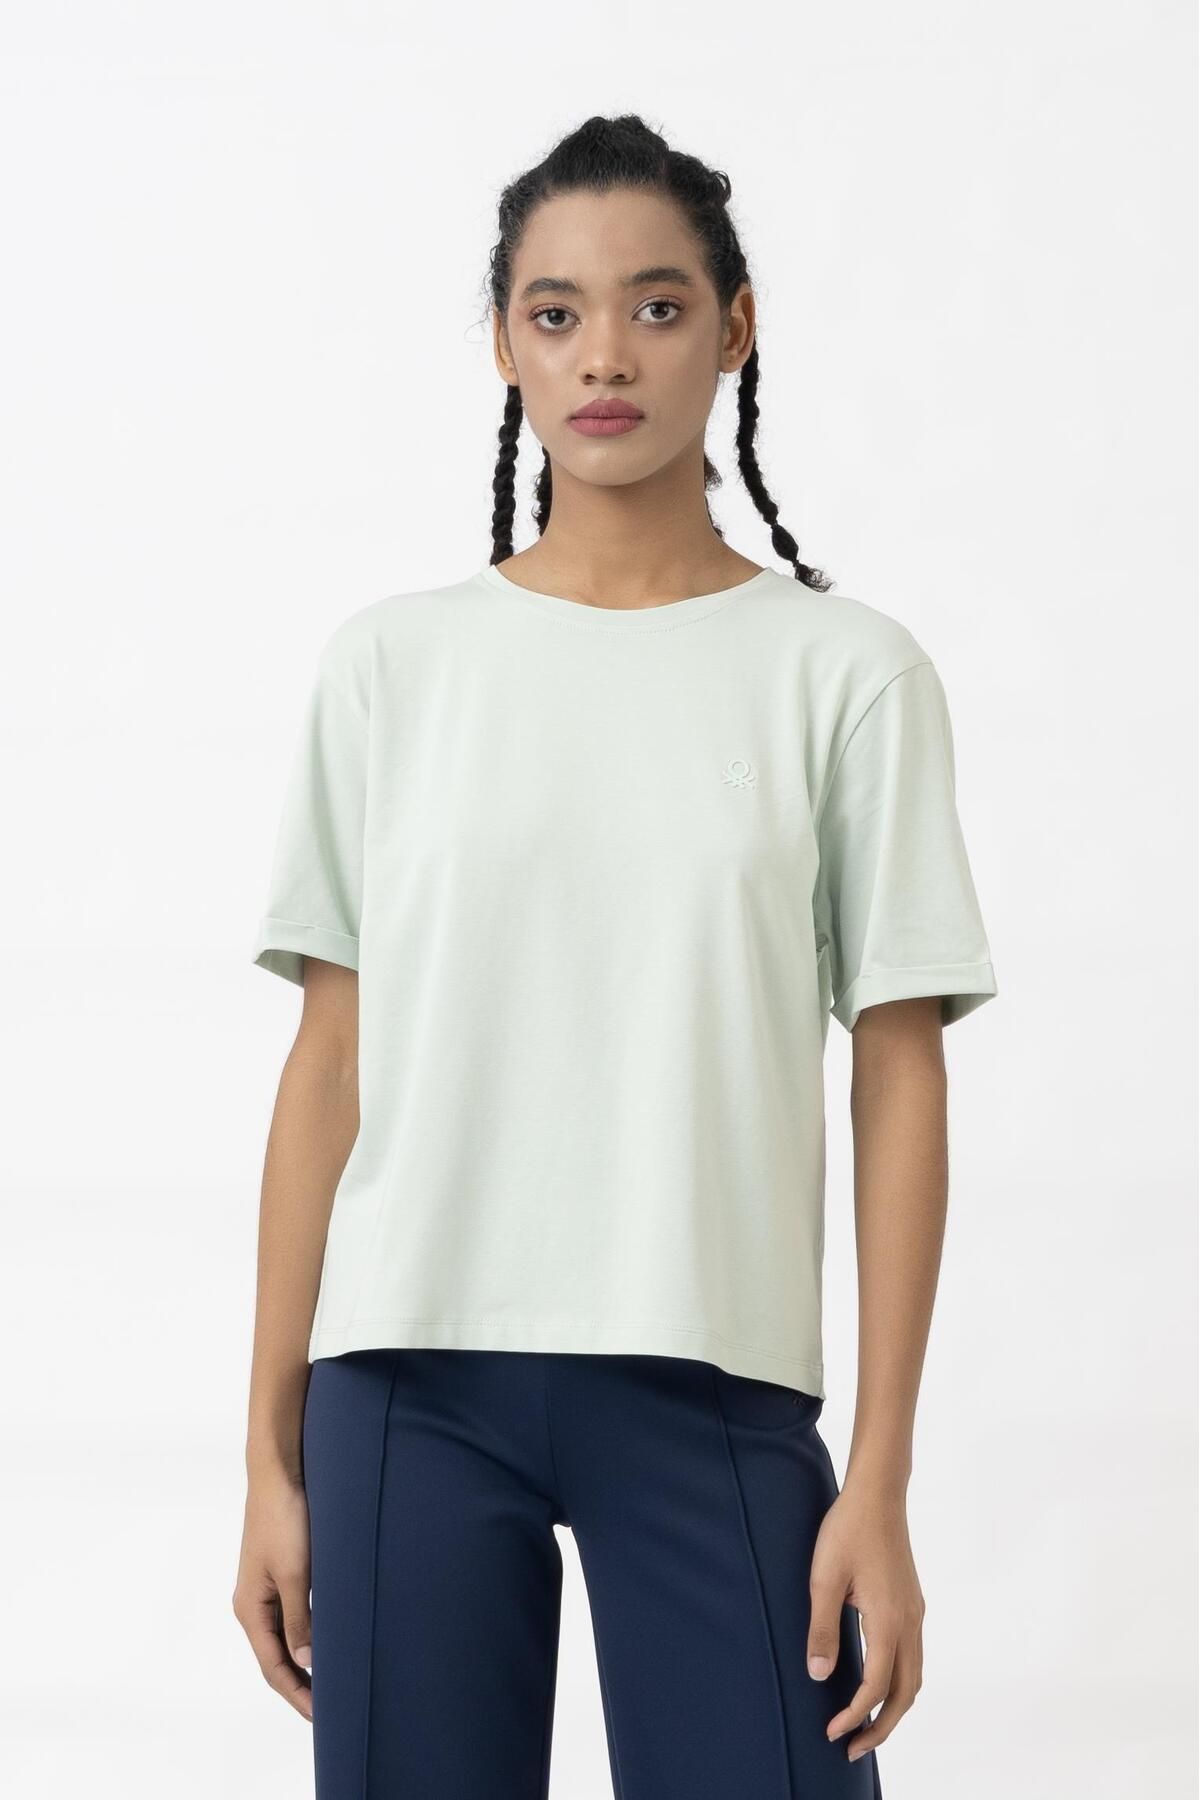 United Colors of Benetton Unıted Colors Of Benetton BNT-W21034